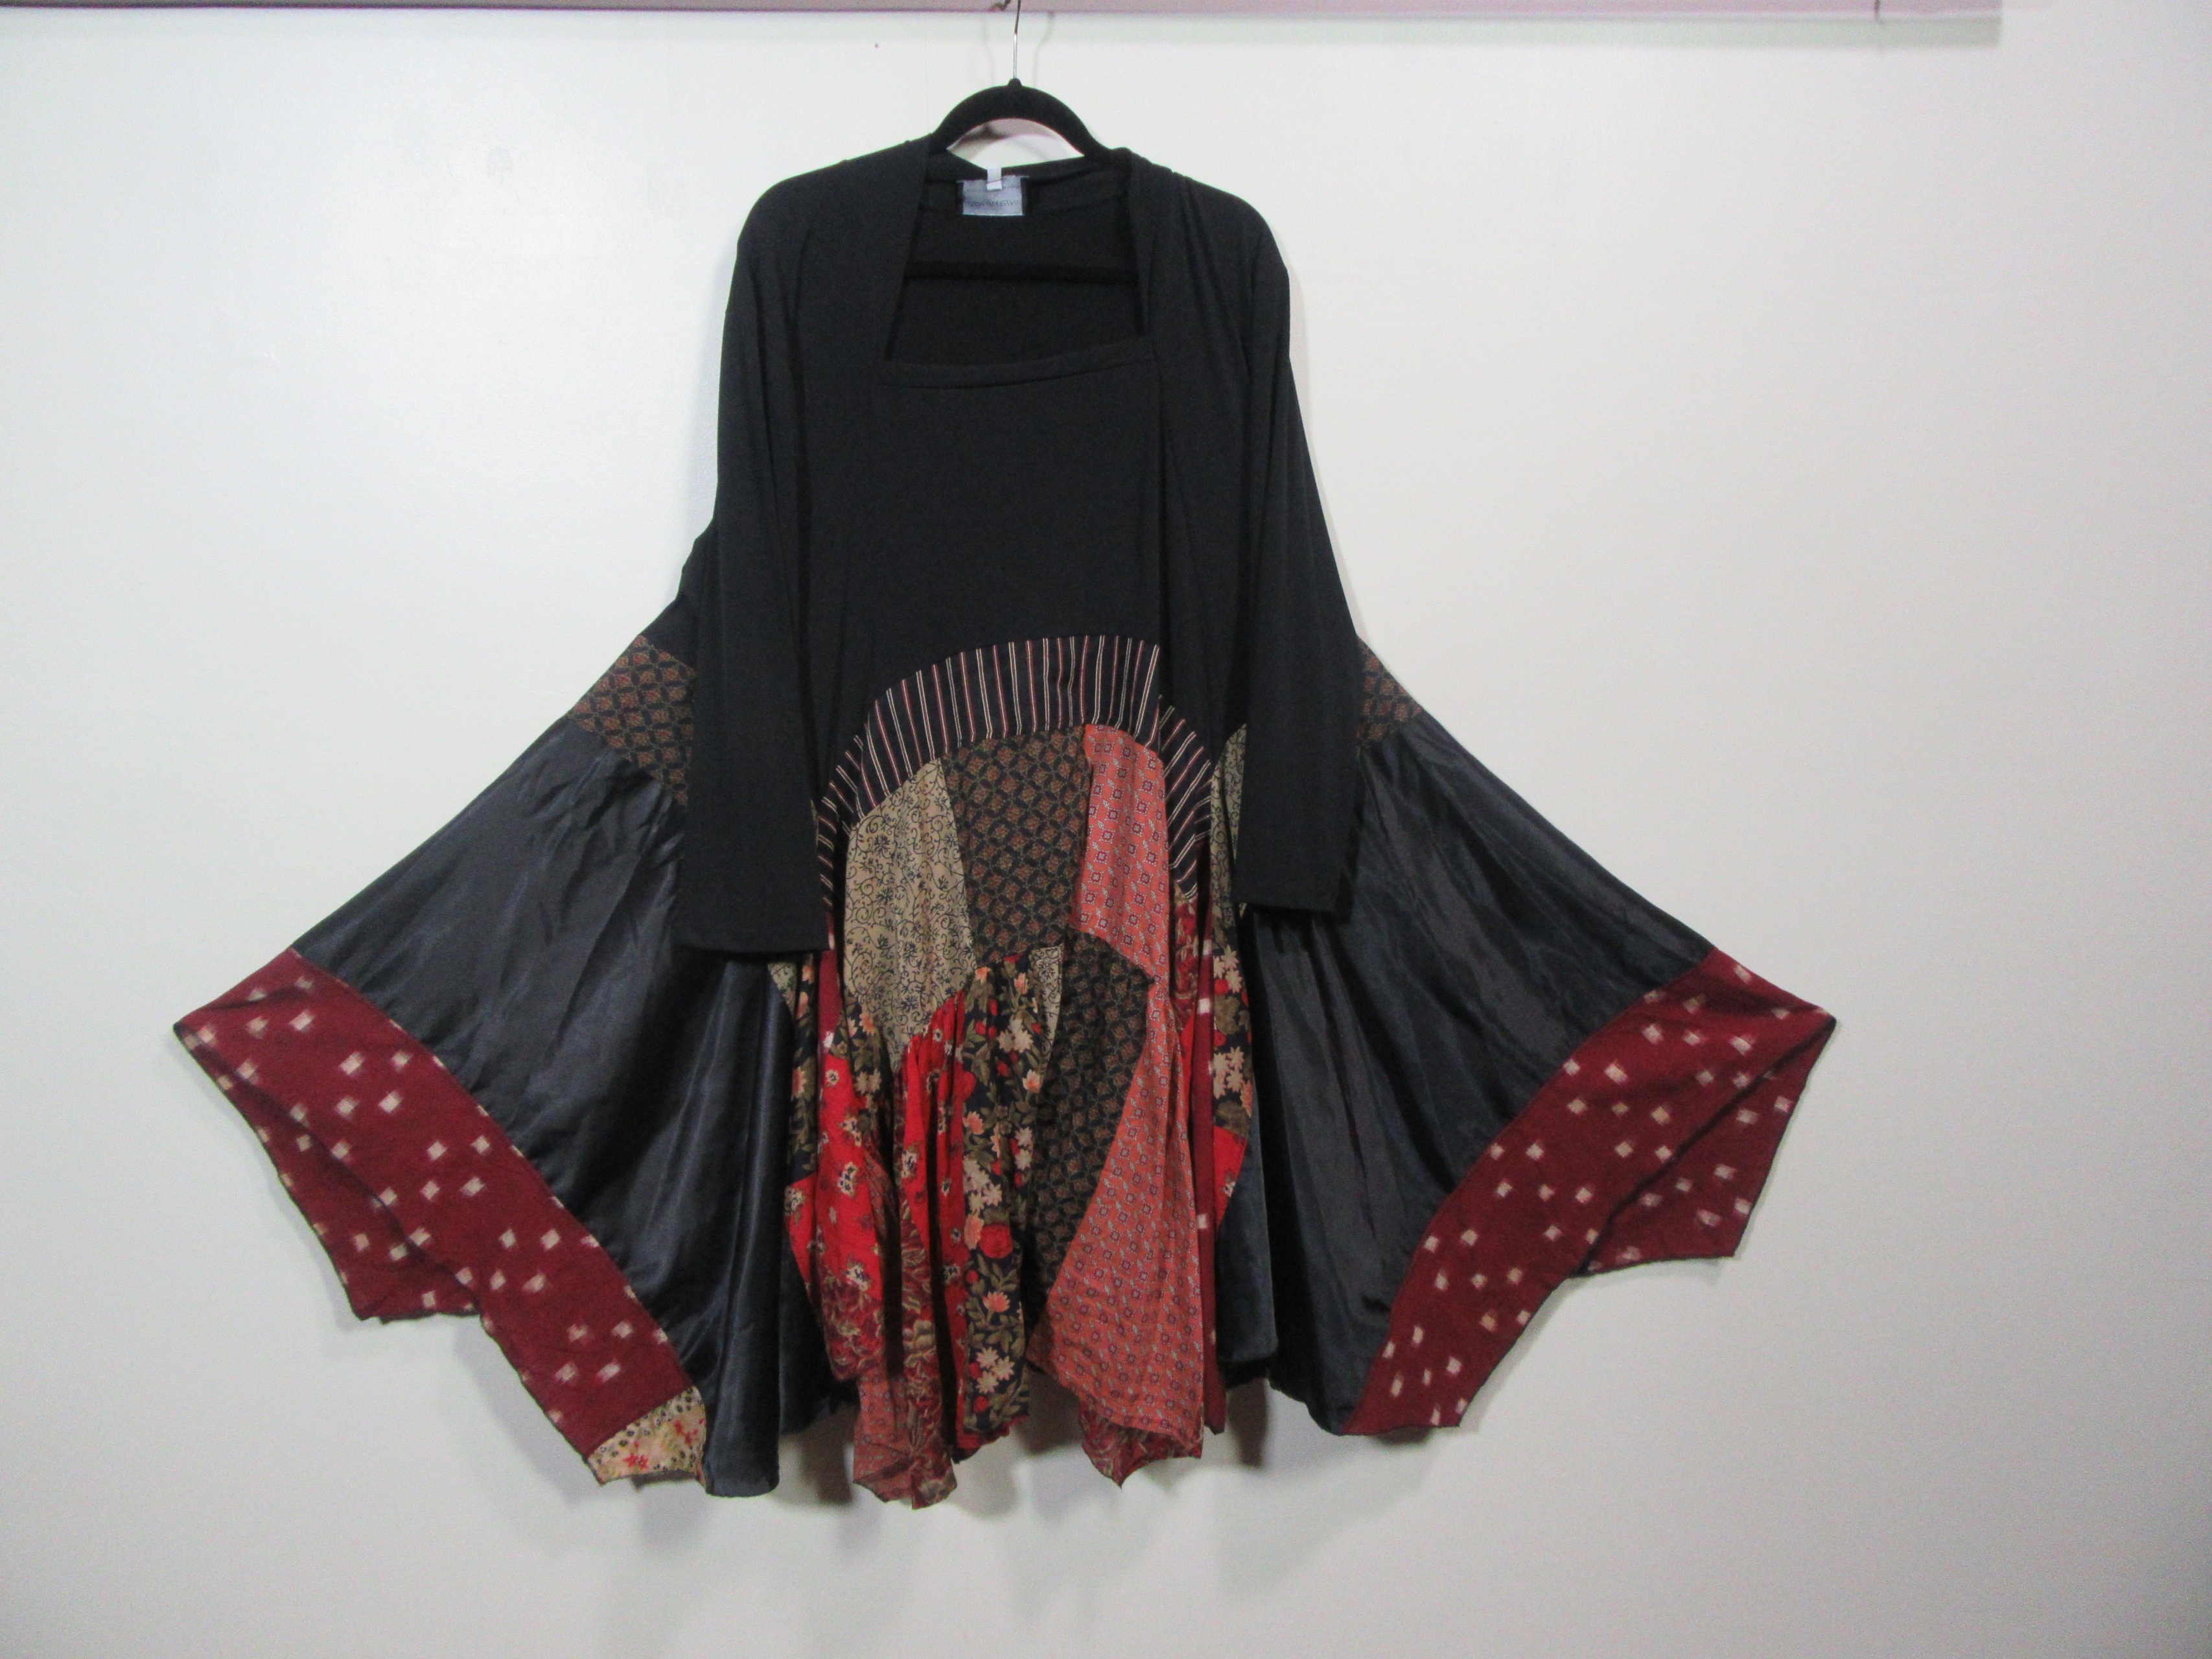 #1 - YUME DREAM DRESS MADE FROM A BLACK EURO KNIT GARBO! DIVINE! BUST ...